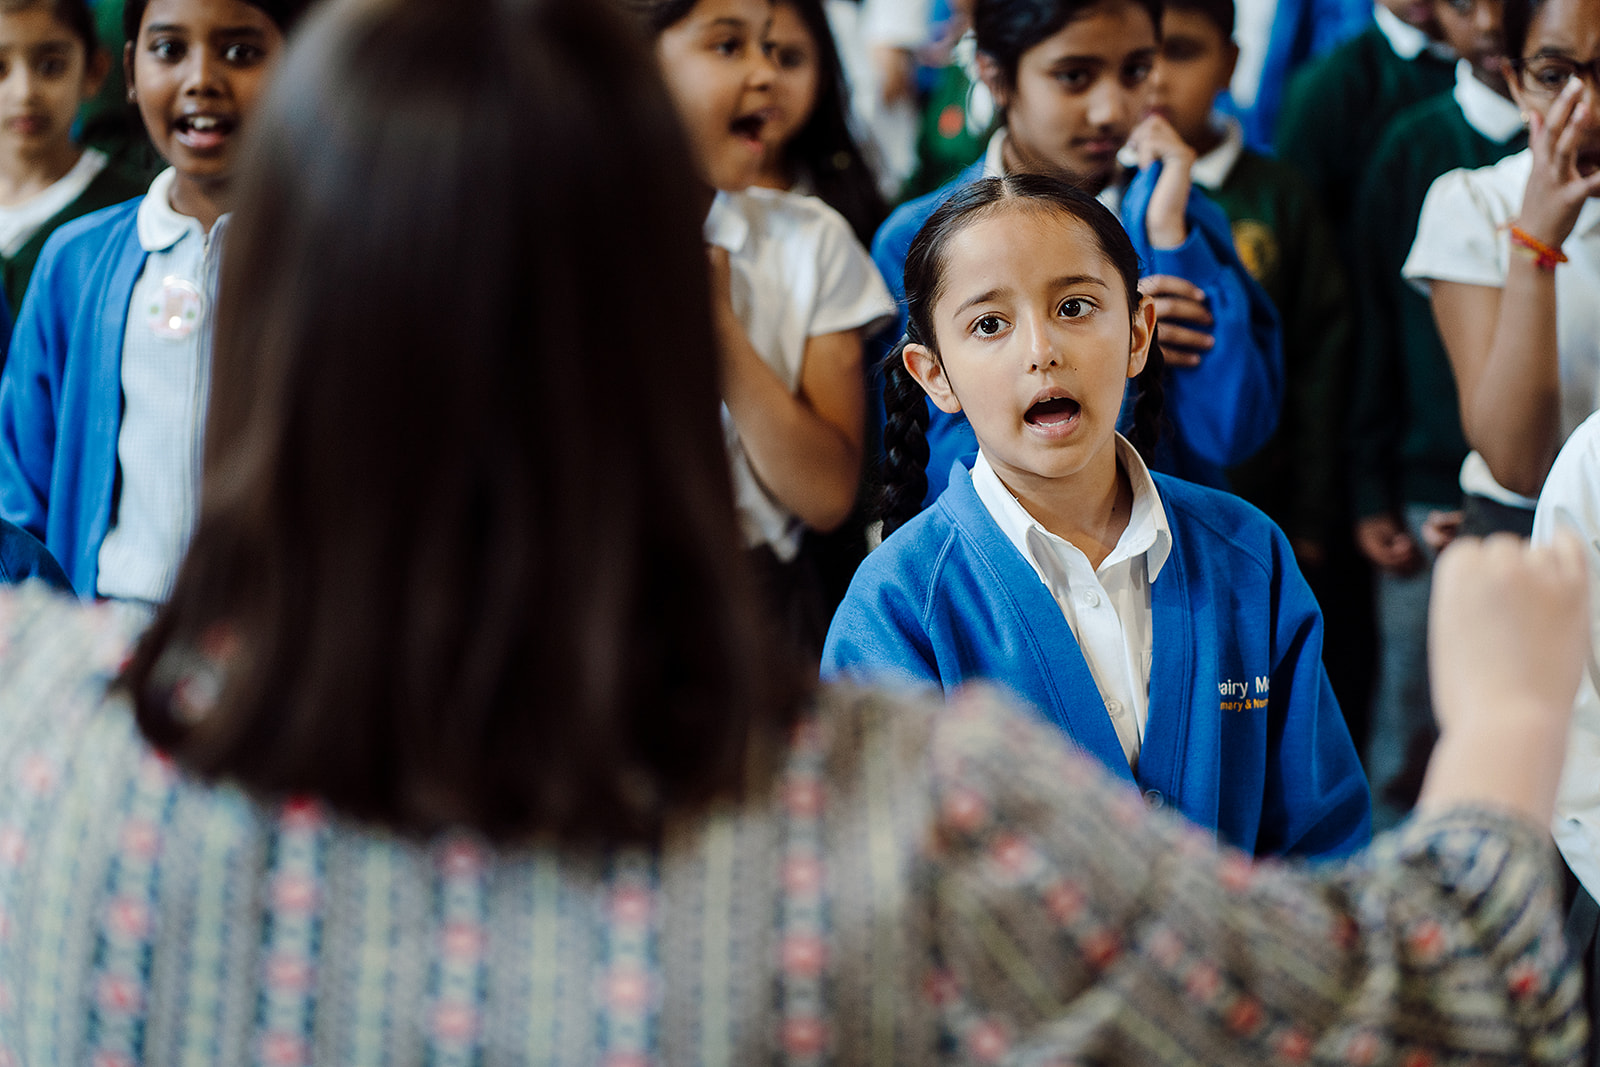 A group of enthusiastic schoolchildren are singing in a classroom, with a focus on a young girl in a blue sweater and white shirt, who is looking intently at the teacher leading the activity. The children's expressions convey engagement and enjoyment as they participate in the musical learning experience.